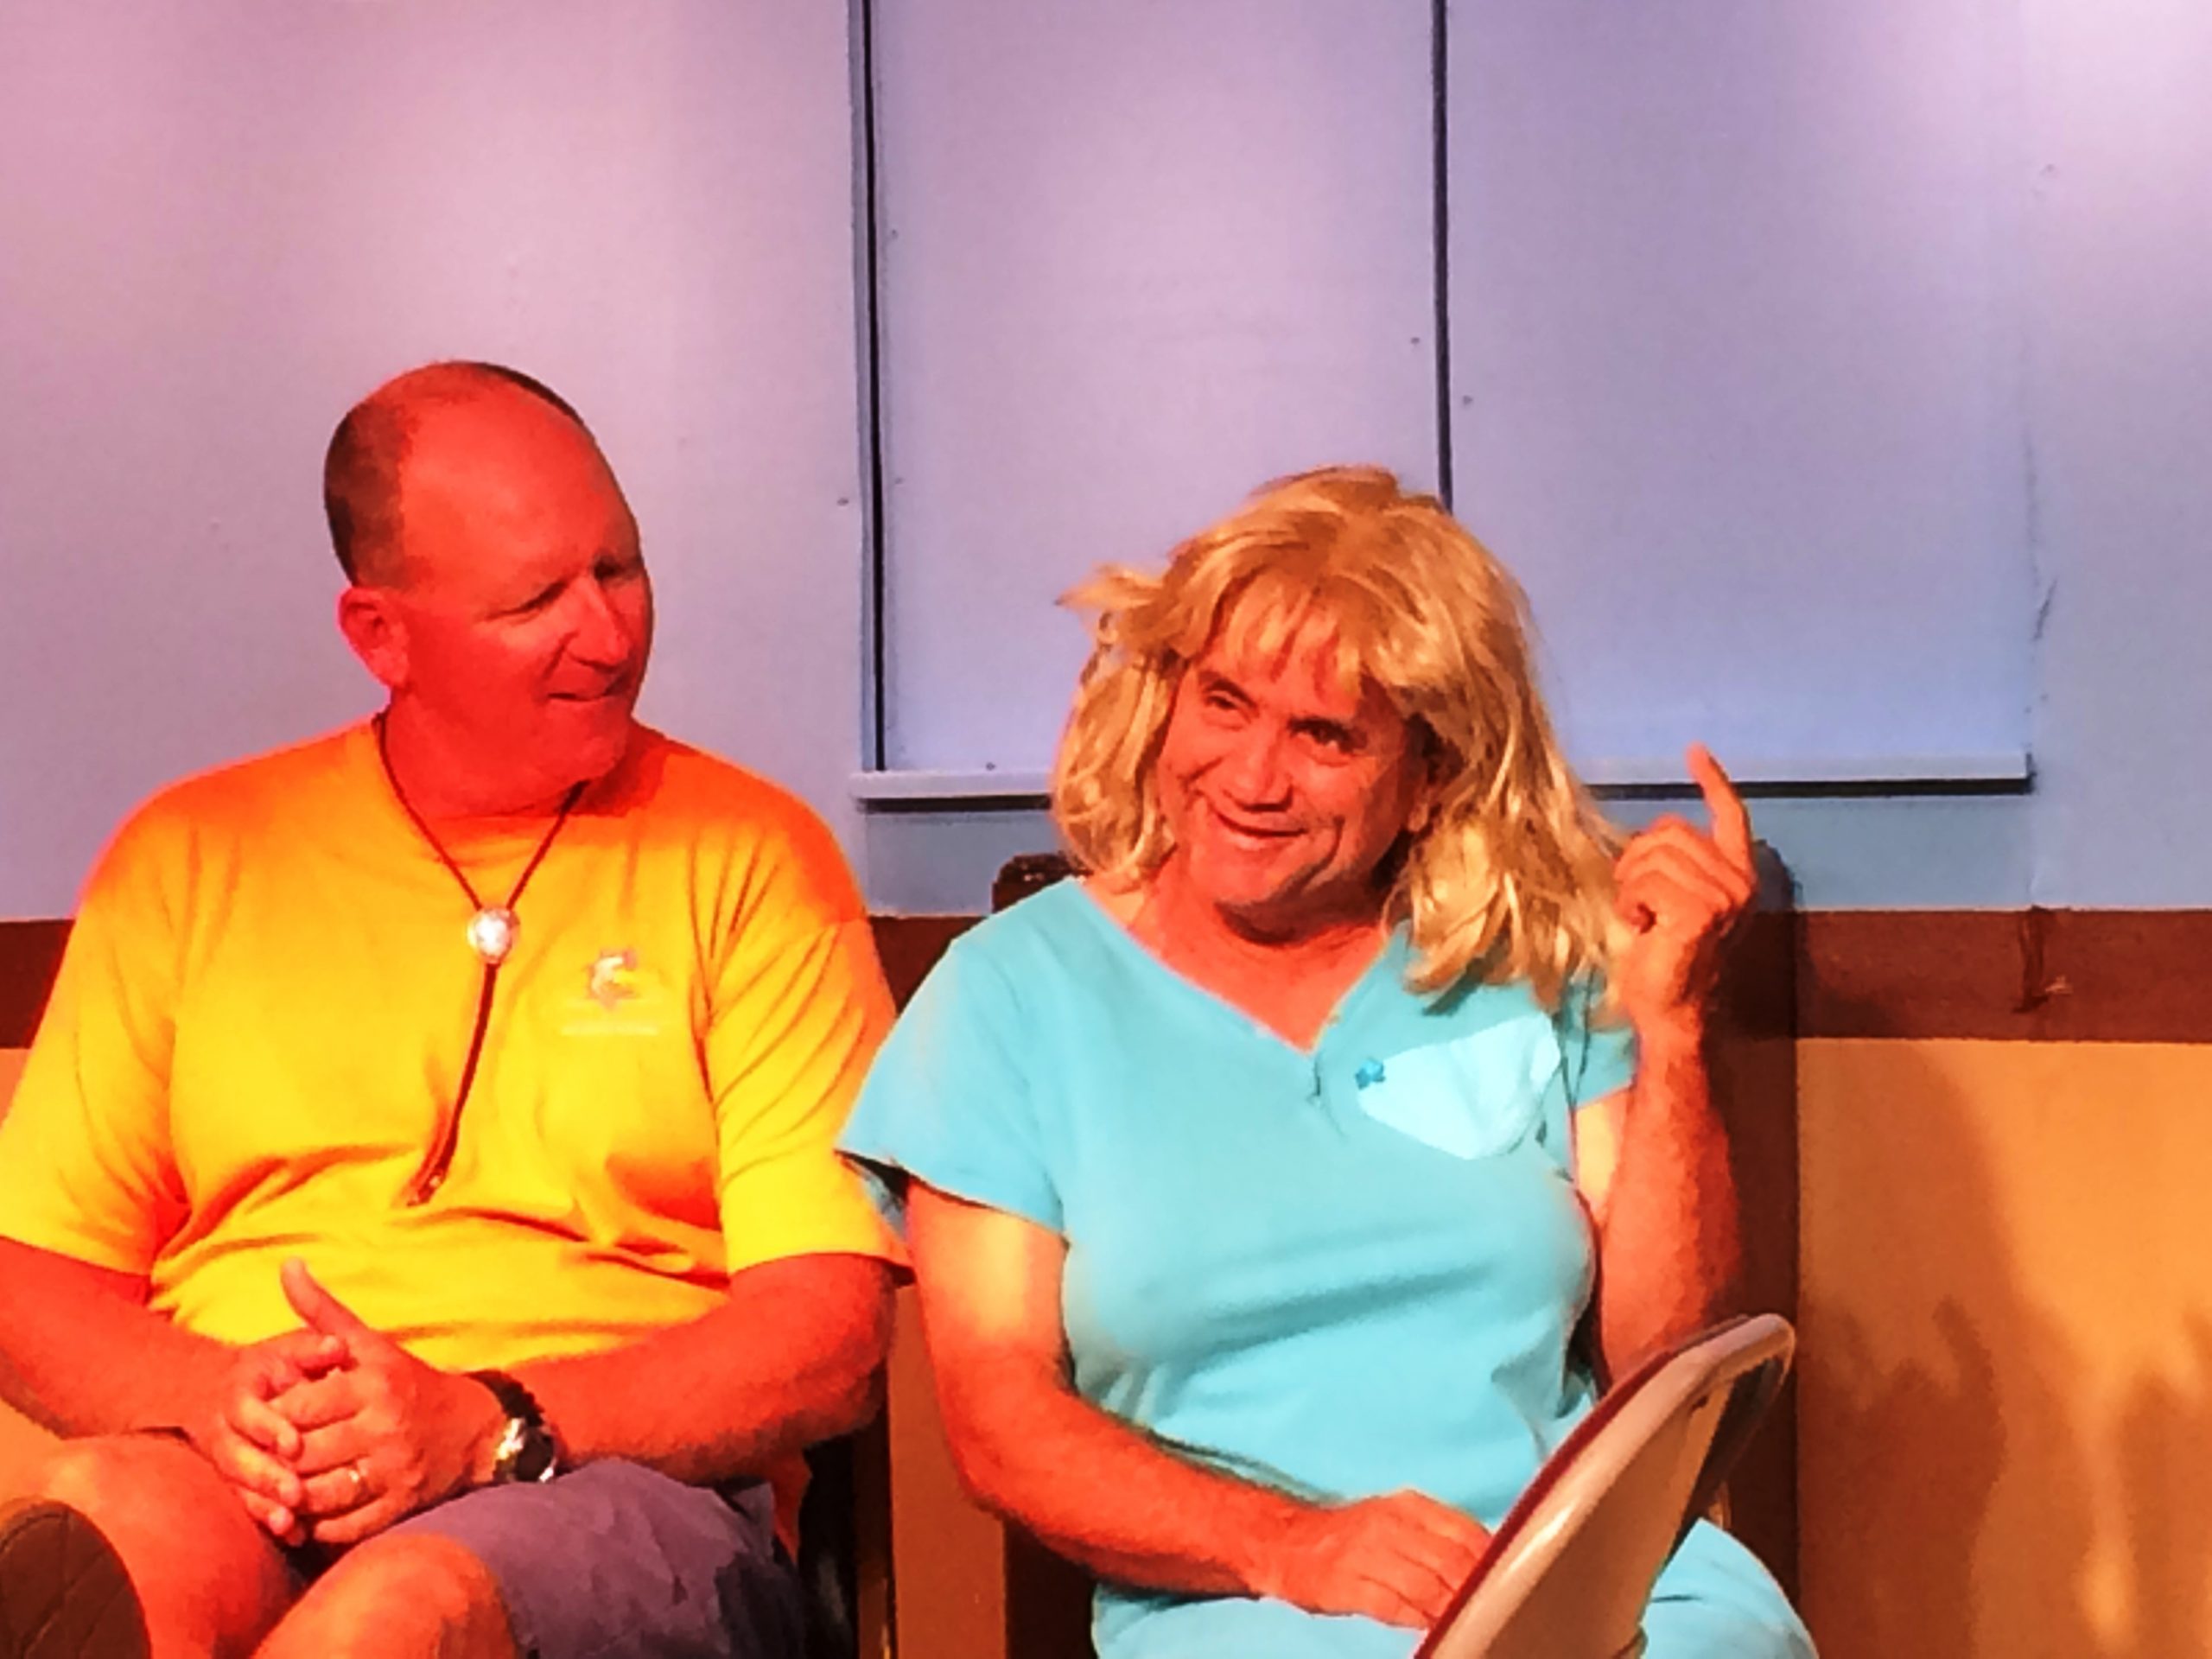 A male actor wearing a yellow shirt sits on a chair and talks with a male actor dressed as a female actor wearing a blue dress and blonde wig